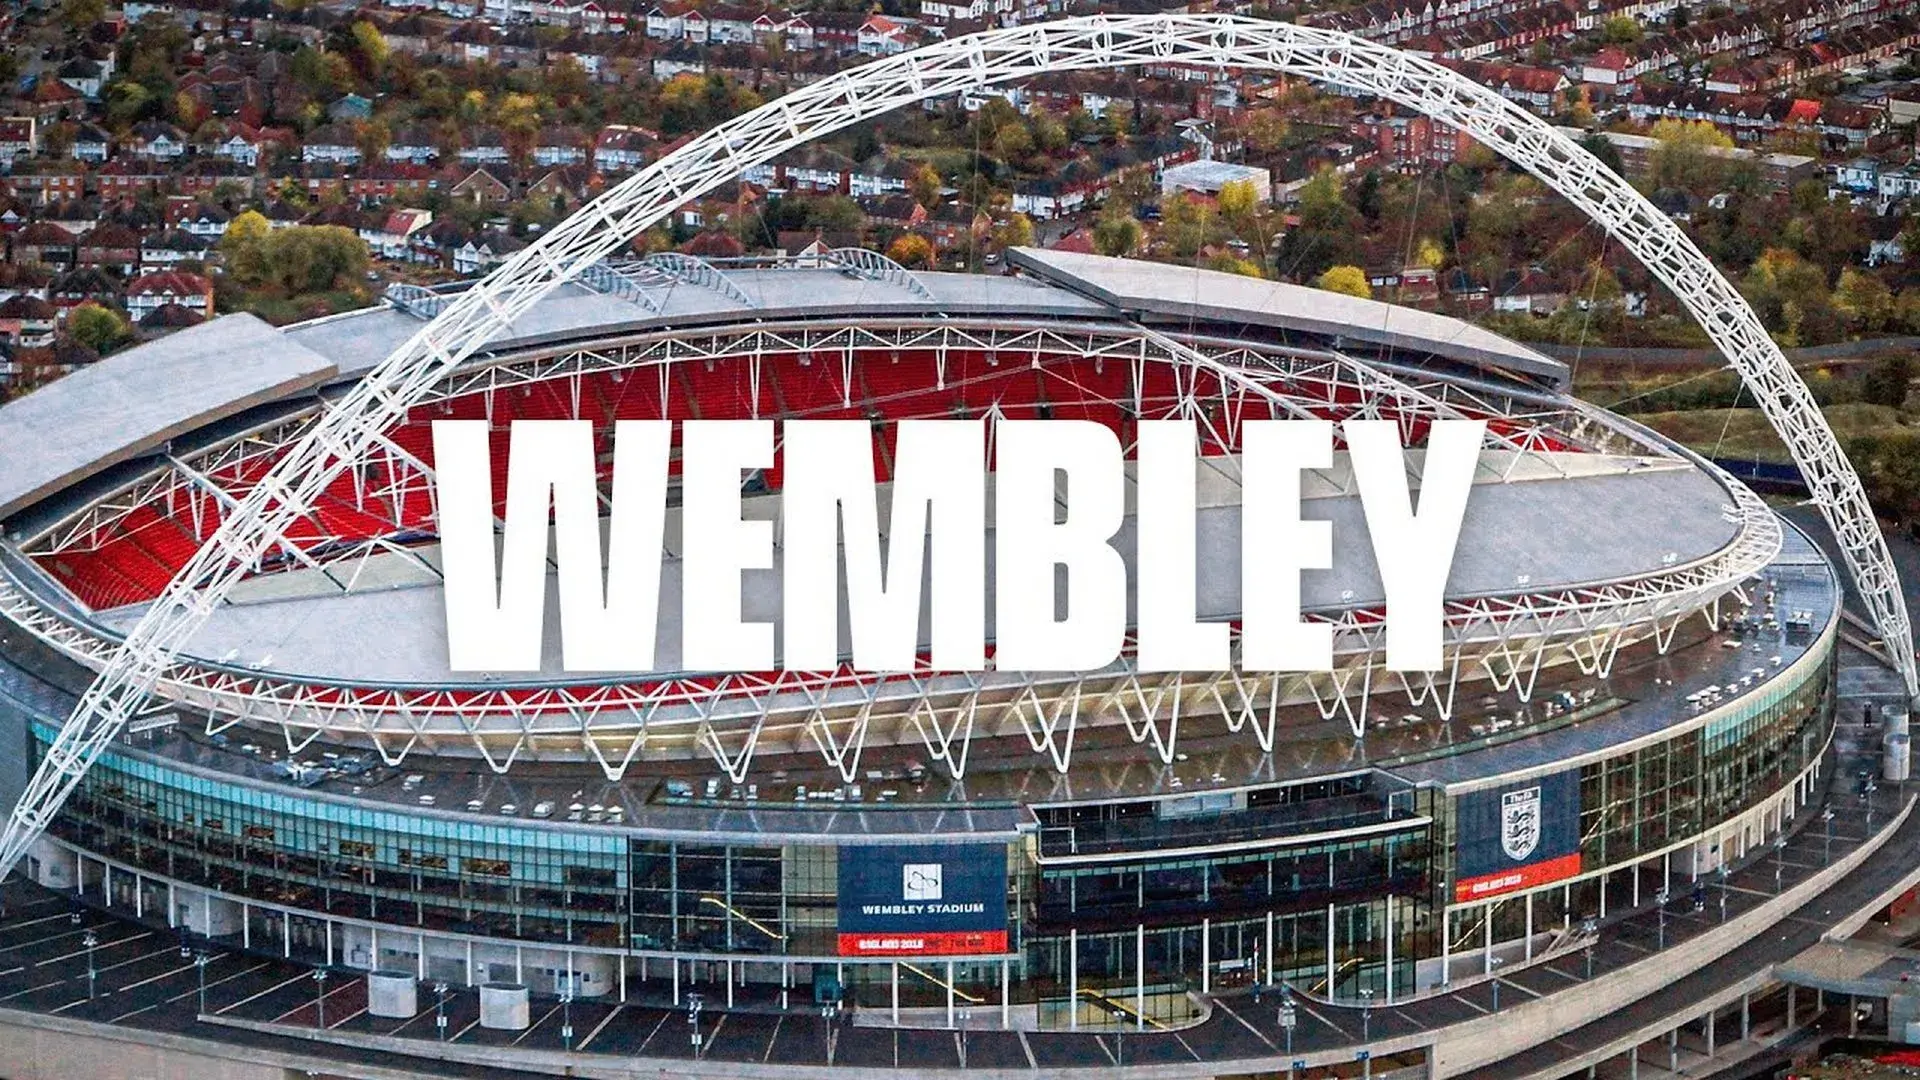 Top 10 Insanely biggest stadiums in England now: Wembley Stadium, England National Team- 90,000 